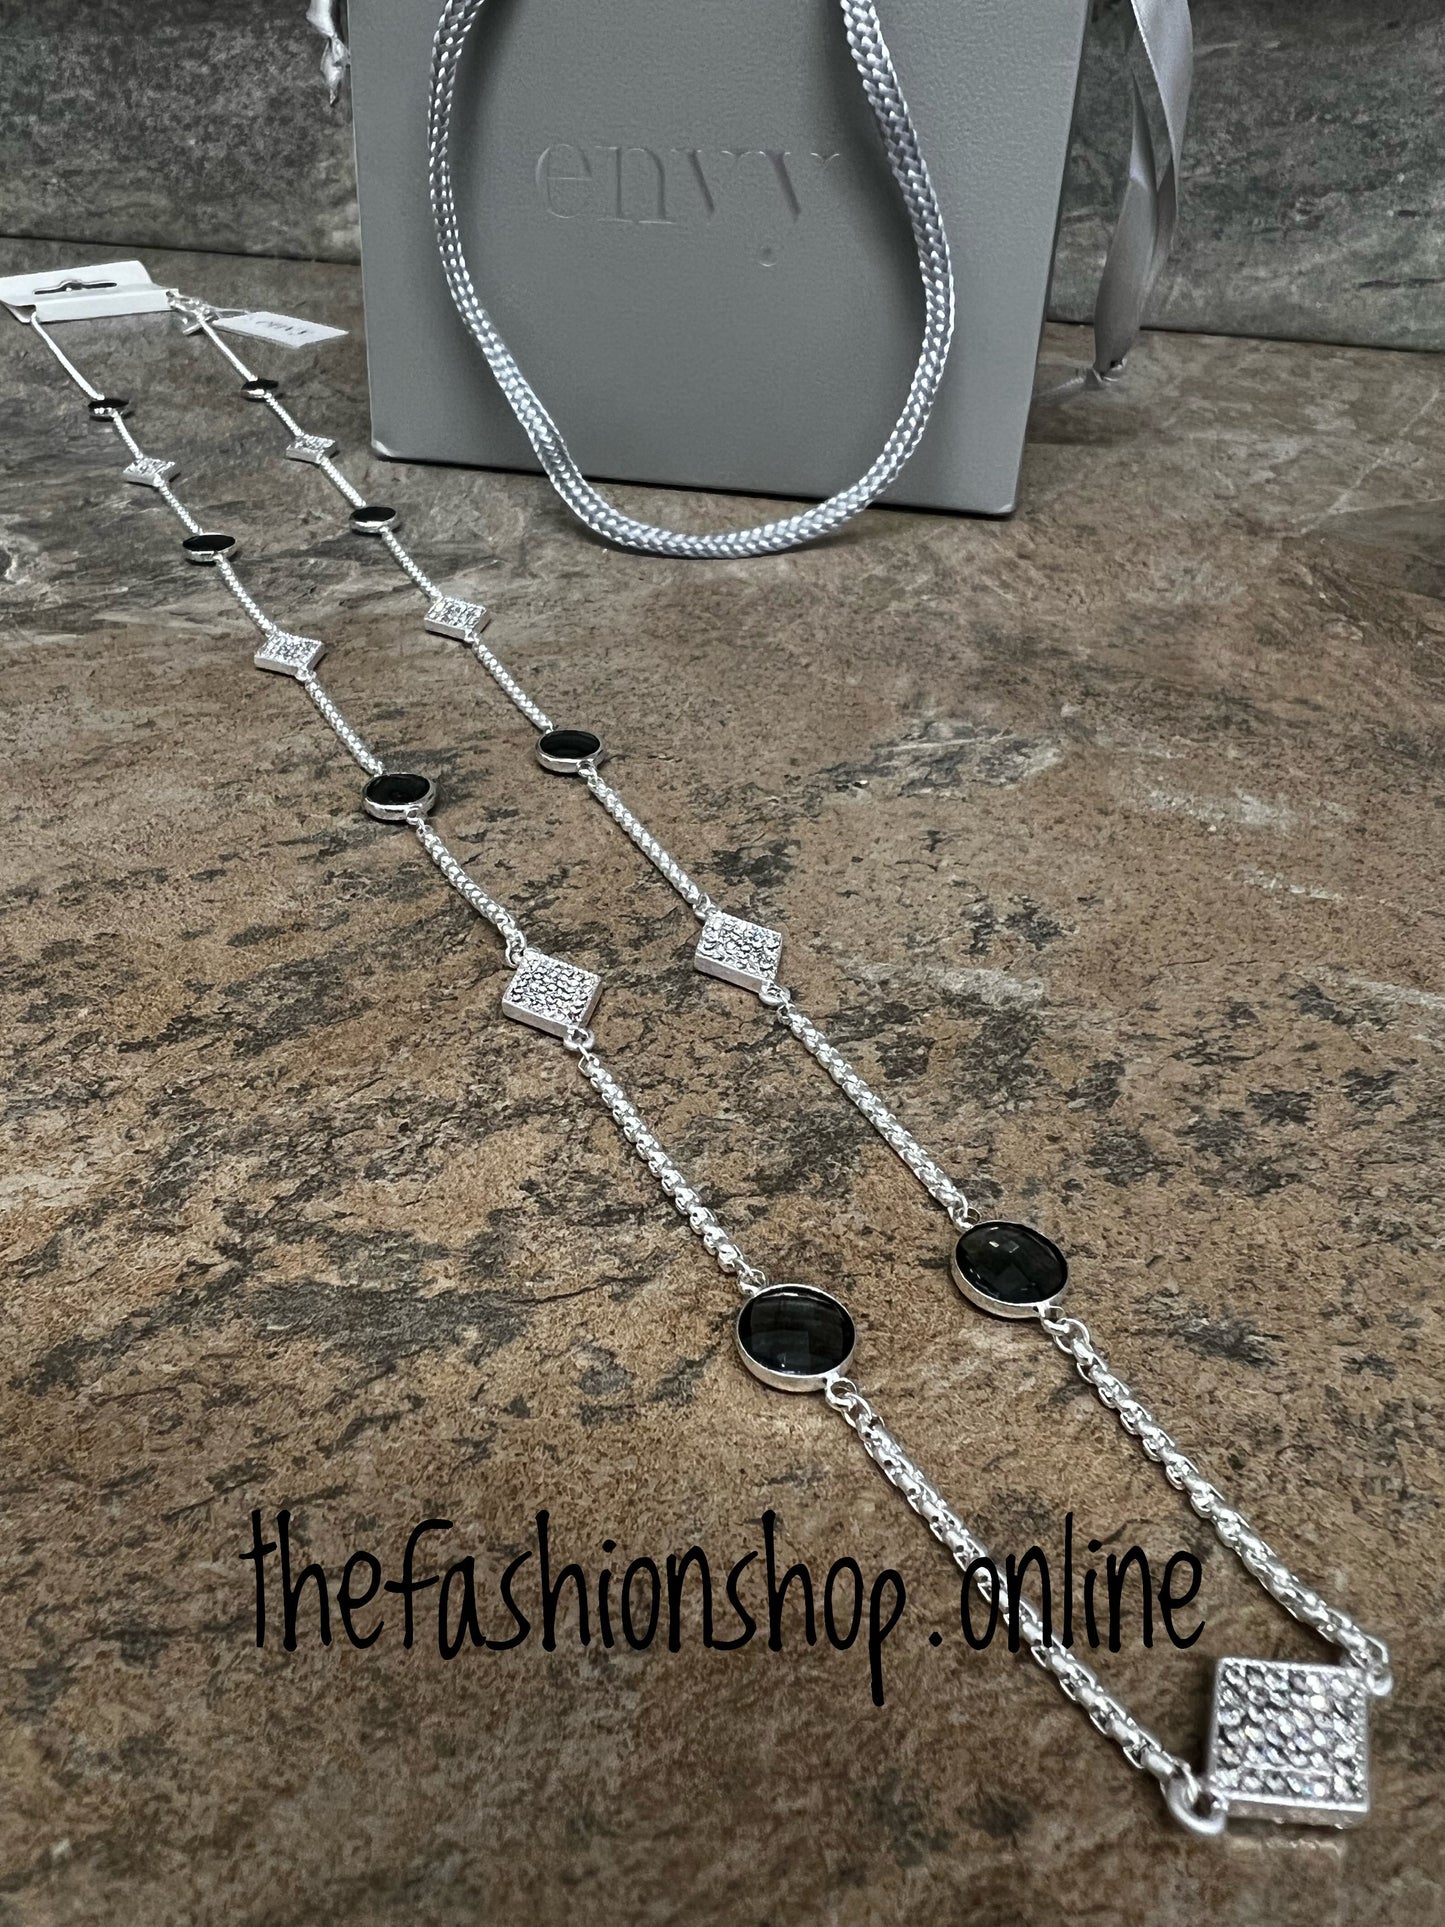 Envy crystal and grey stones long necklace